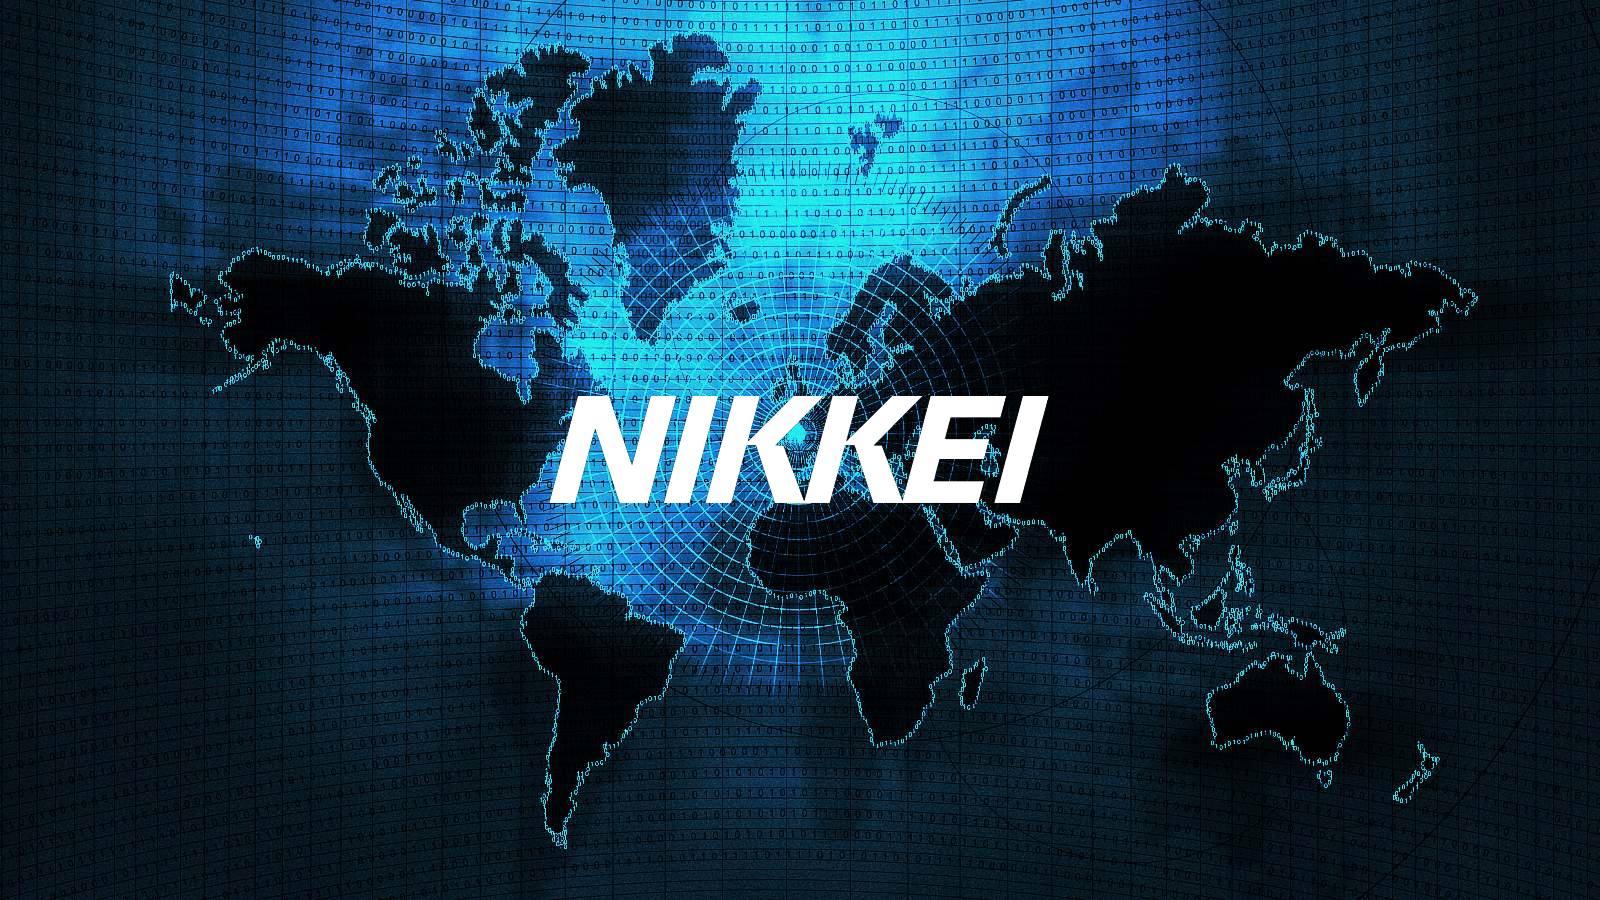 Media giant Nikkei’s Asian unit hit by ransomware attack